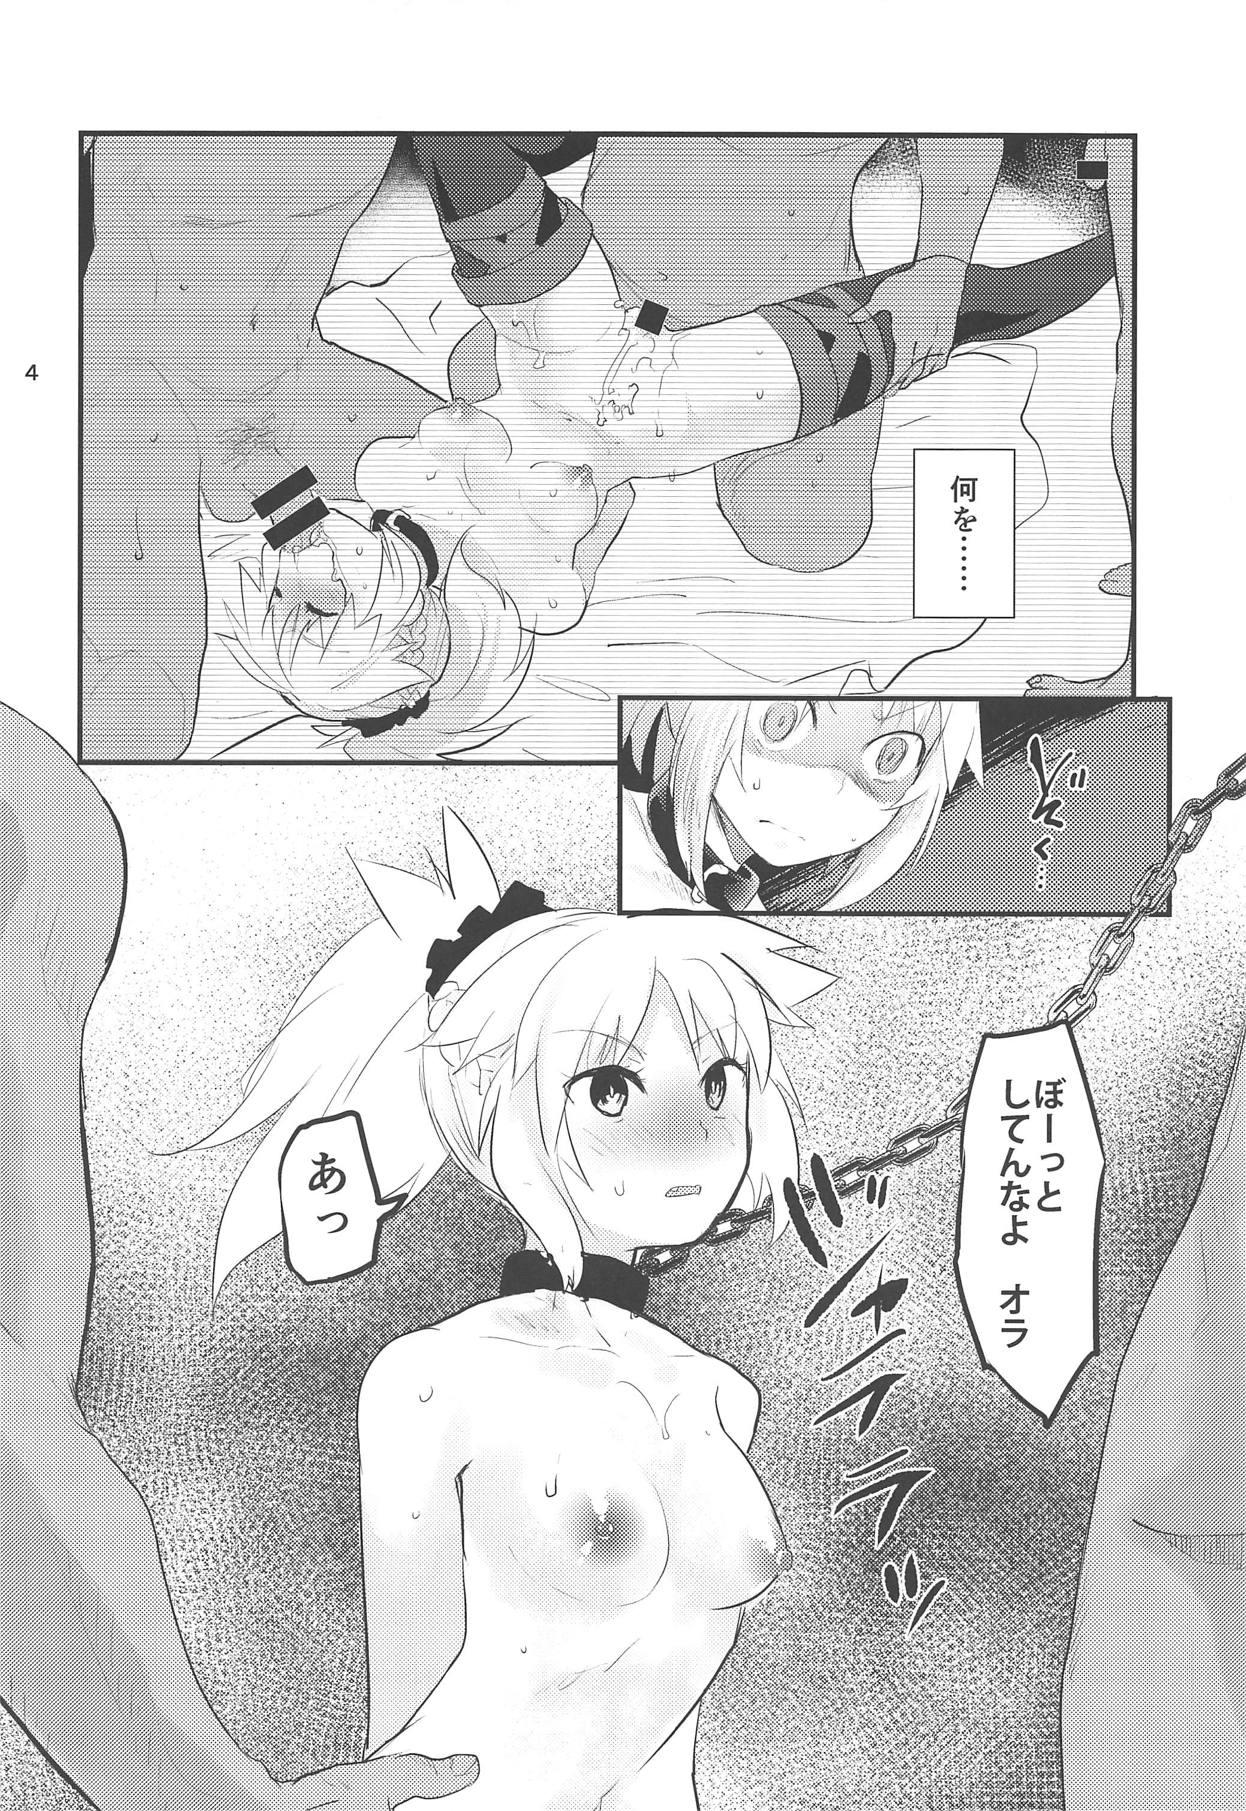 Atm Erotic to Knight - Fate grand order Big Pussy - Page 3